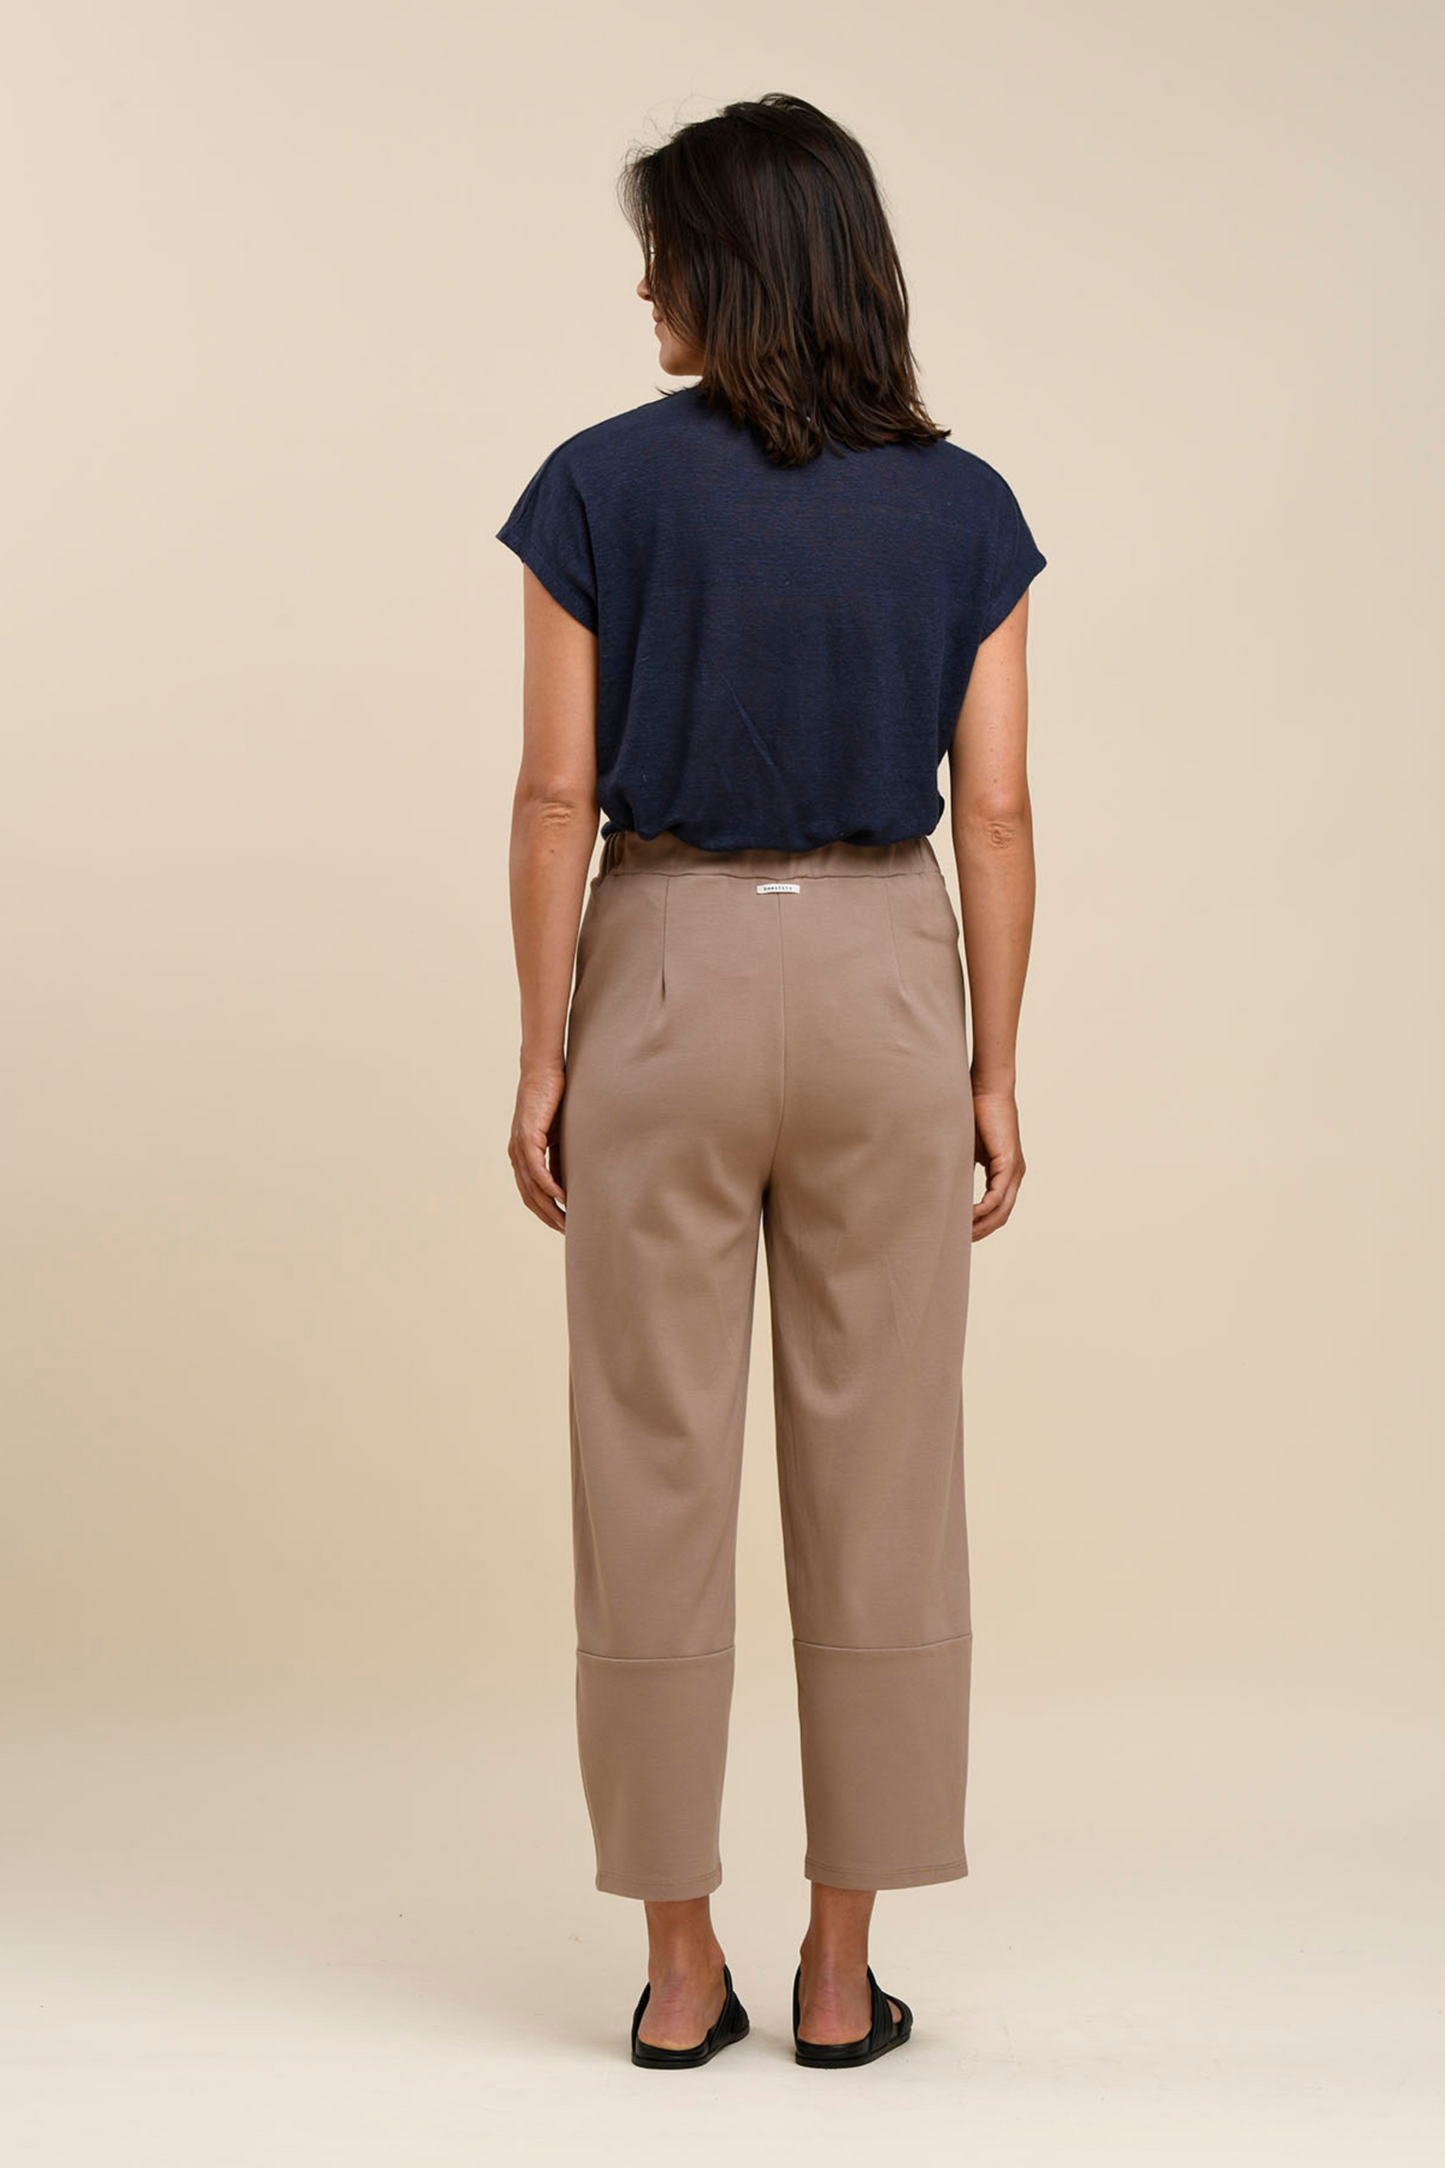 Humility  - Unia Pants in Taupe